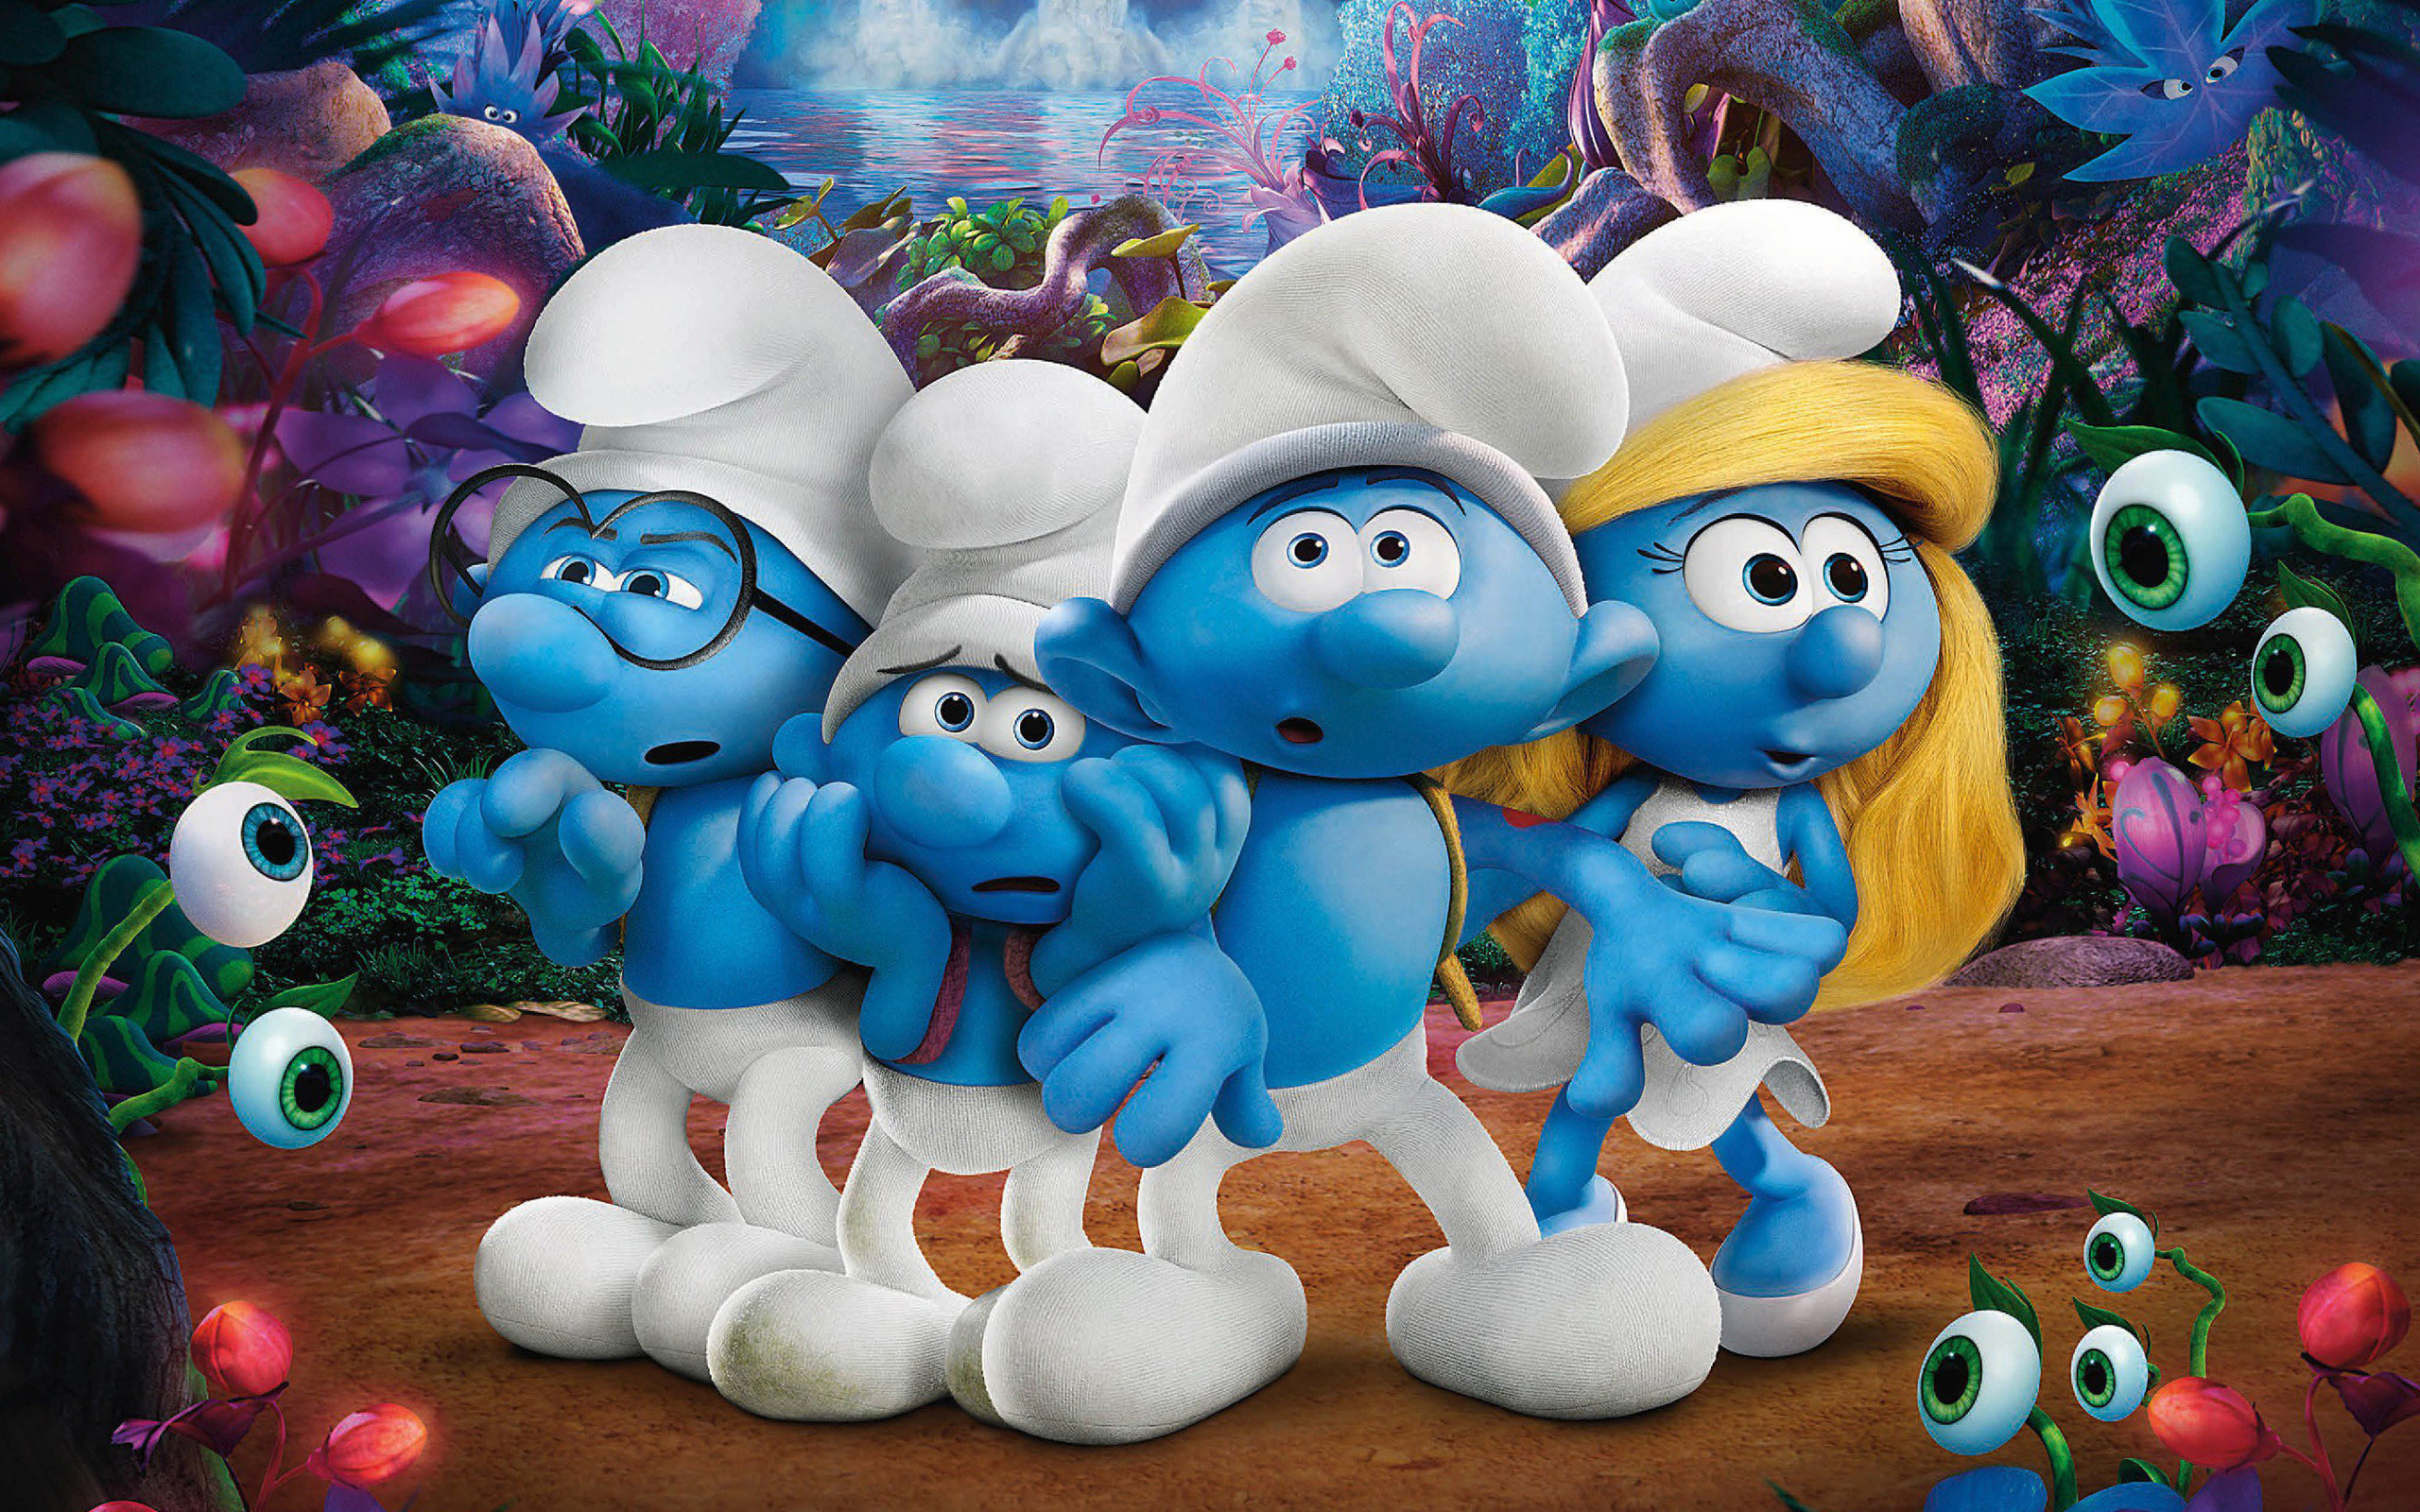 Wallpaper ID 379287  Movie The Smurfs Phone Wallpaper  1080x2160 free  download